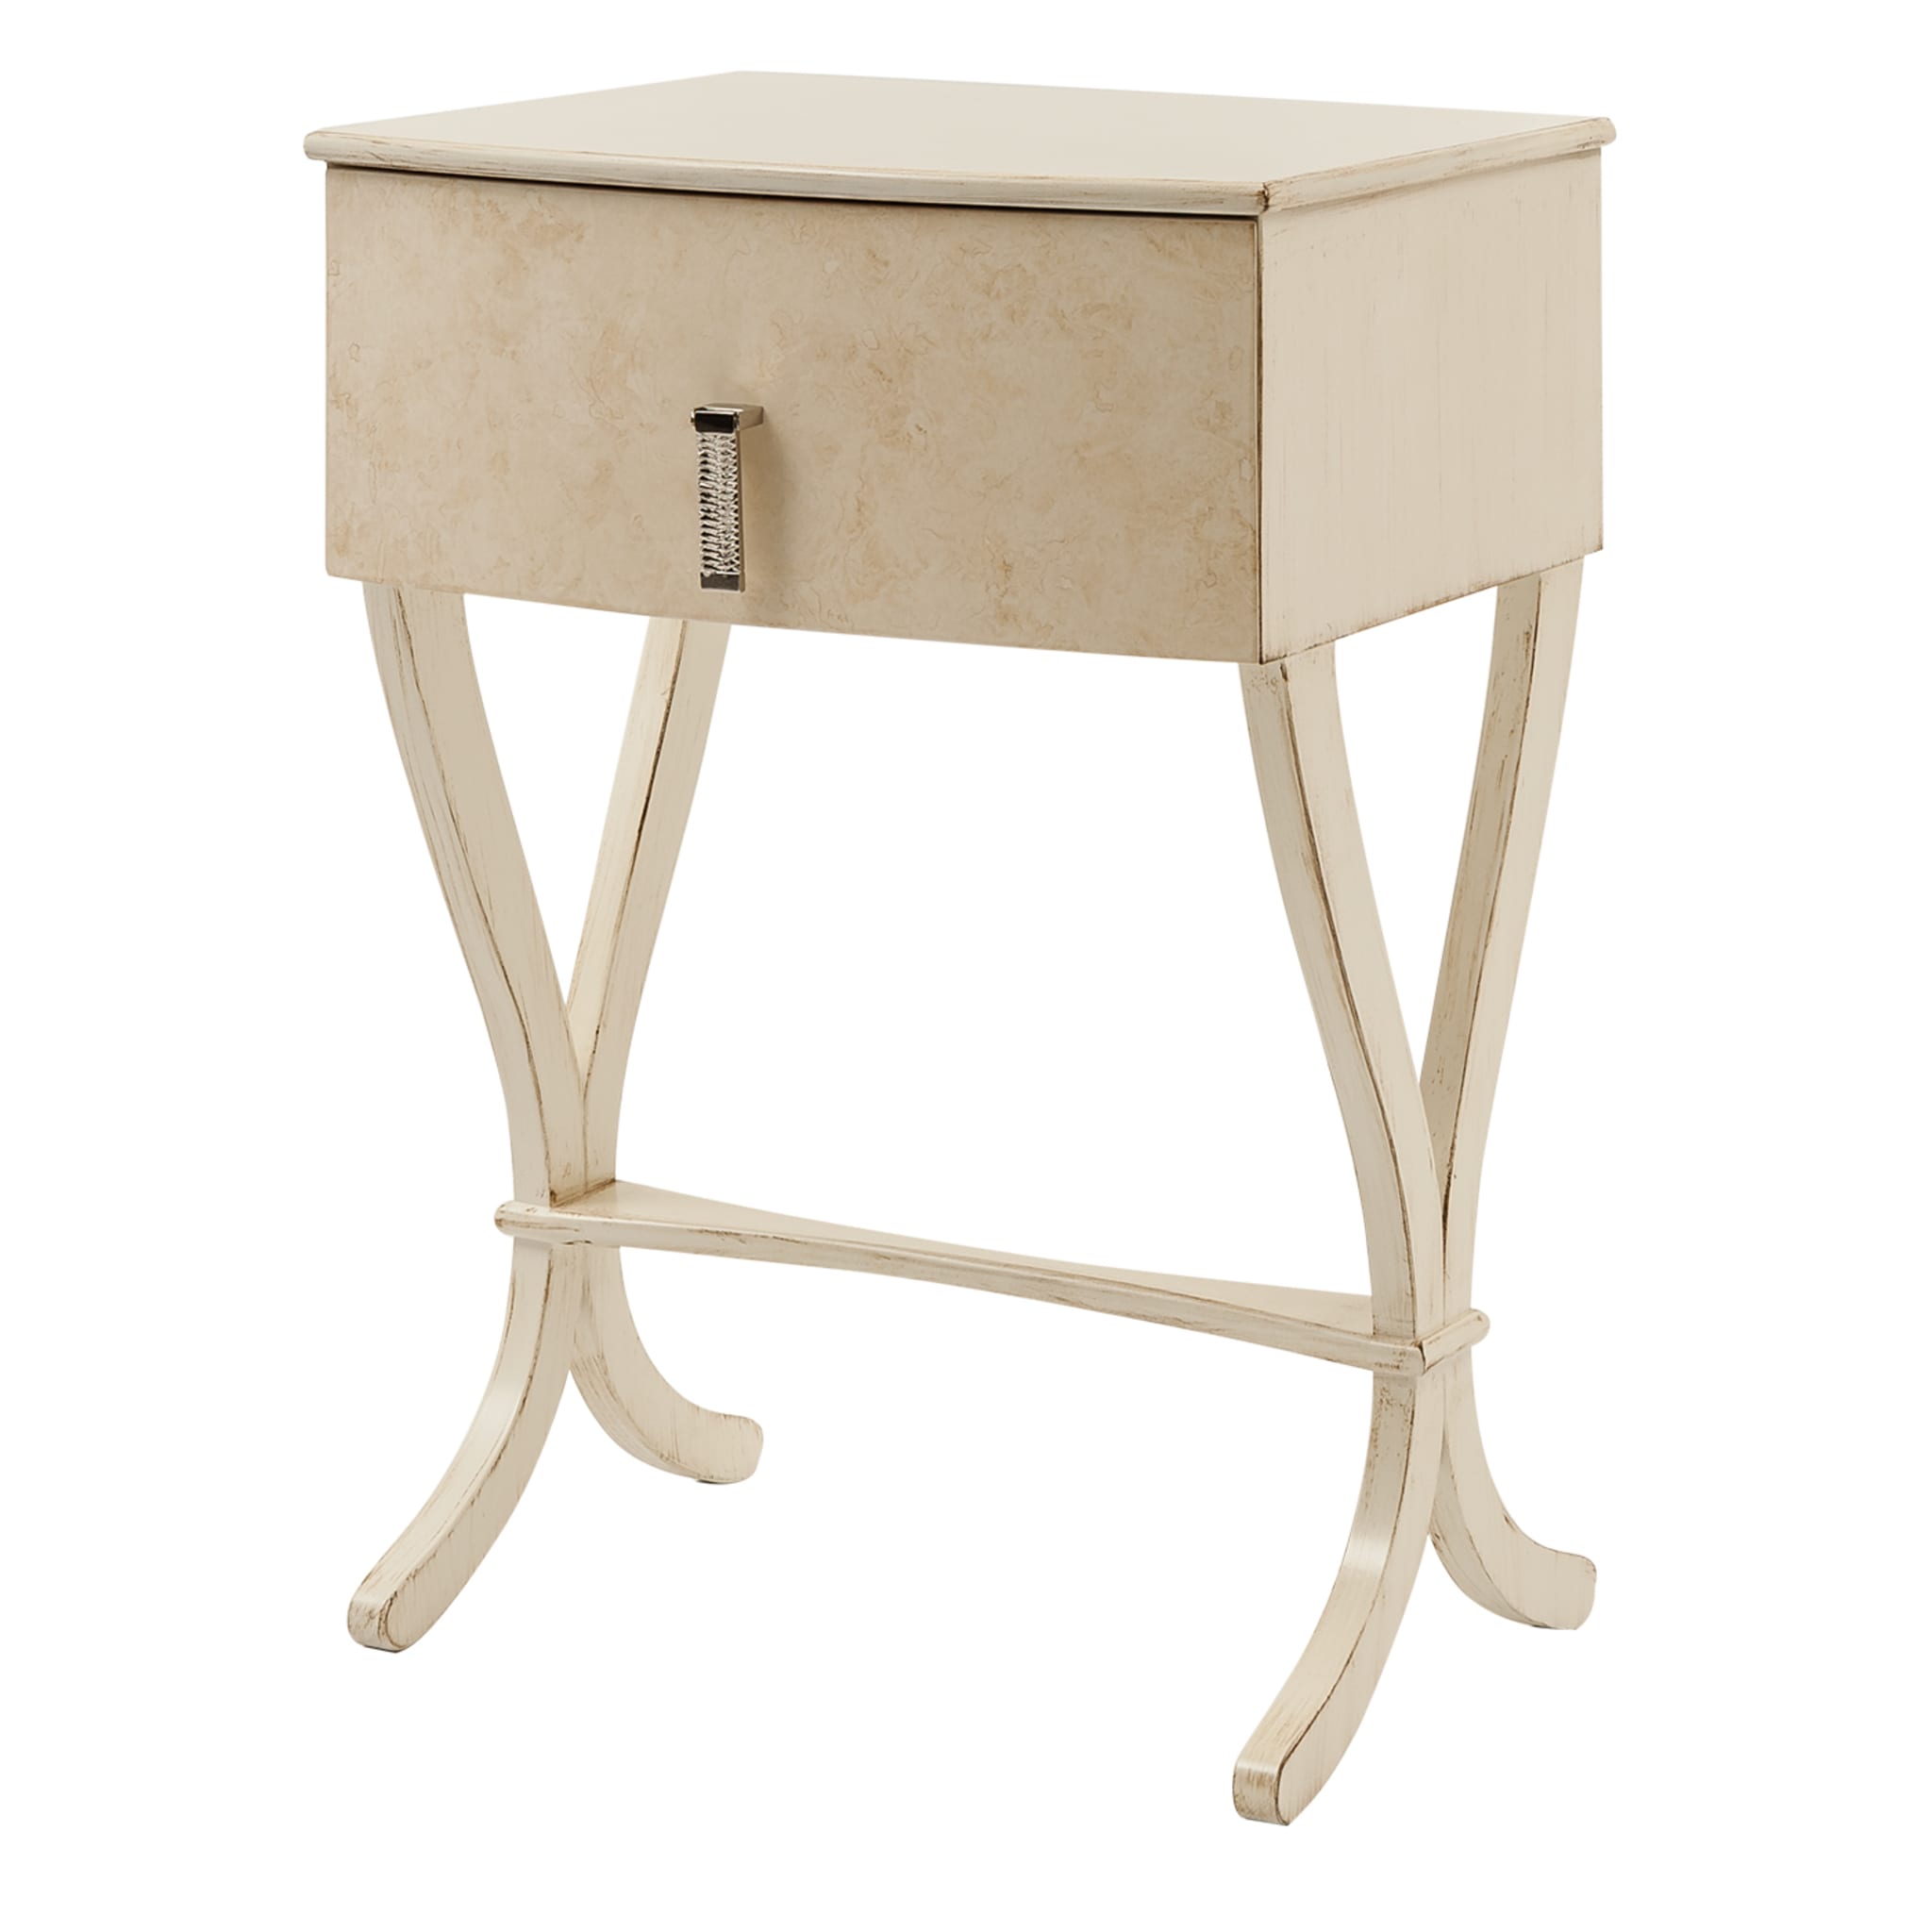 Novecento Marble-Effect Cream-Toned Nightstand - Alternative view 1